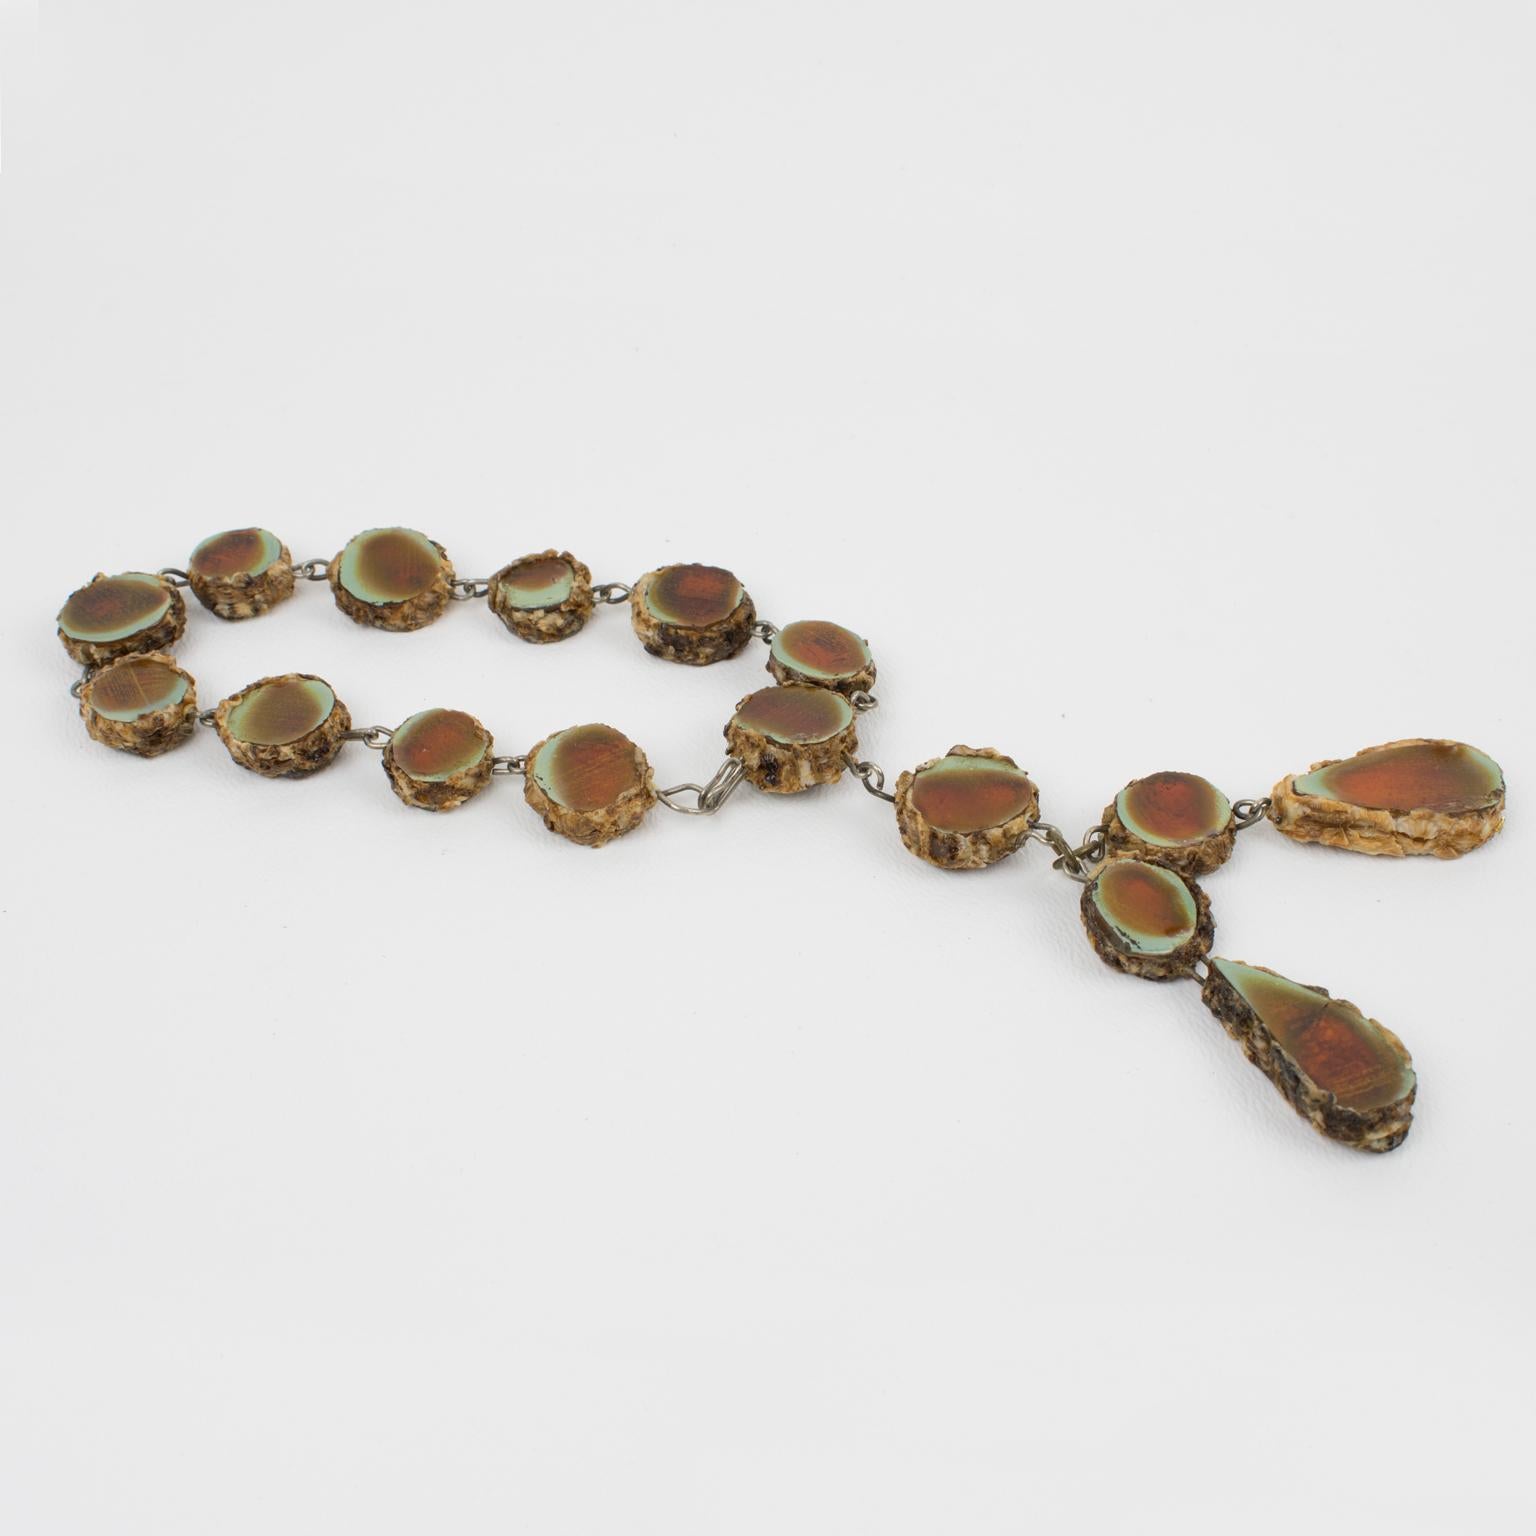 Stunning 1960s Talosel resin bracelet by Line Vautrin, Paris. Tan-brown colored resin or Talosel link shape with encrusted tinted glass. Glass color is a lovely honey brown tone with sea-foam green edges. Unusual dangling charm on the